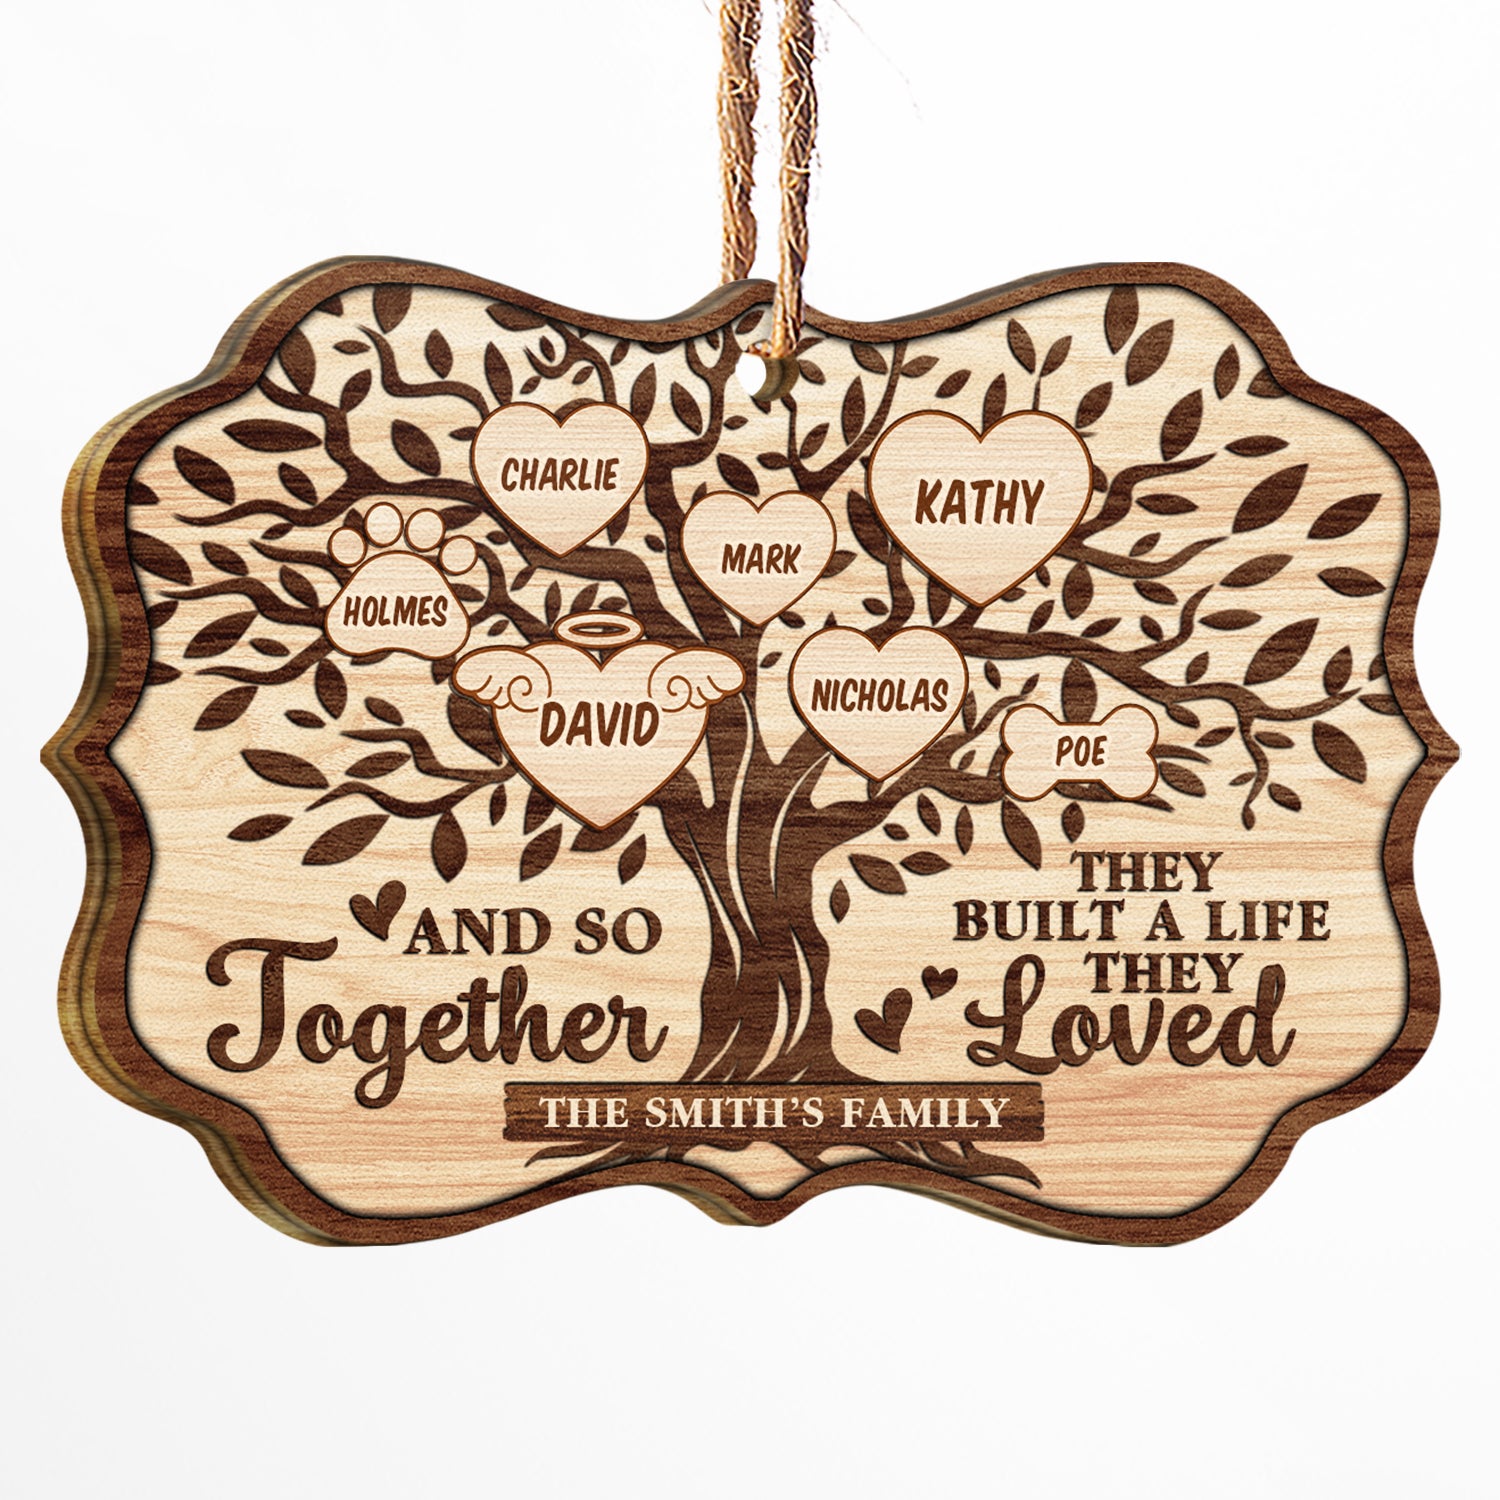 Christmas Family Tree And So Together They Built A Life They Loved - Memorial Gift For Family - Personalized Custom Wooden Ornament